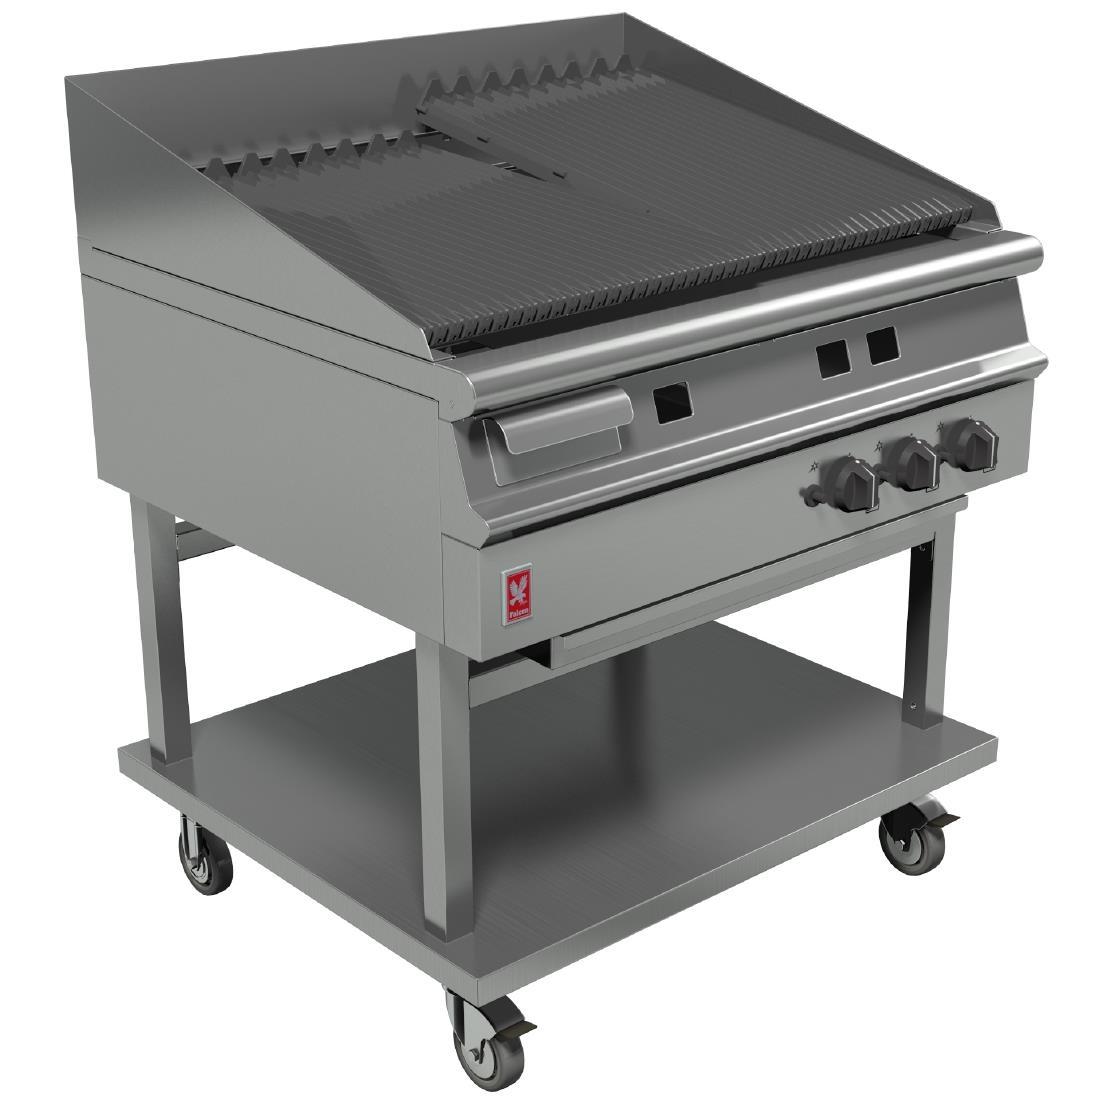 Falcon Dominator Plus LPG Chargrill On Mobile Stand G3925 - GP028-P  - 1